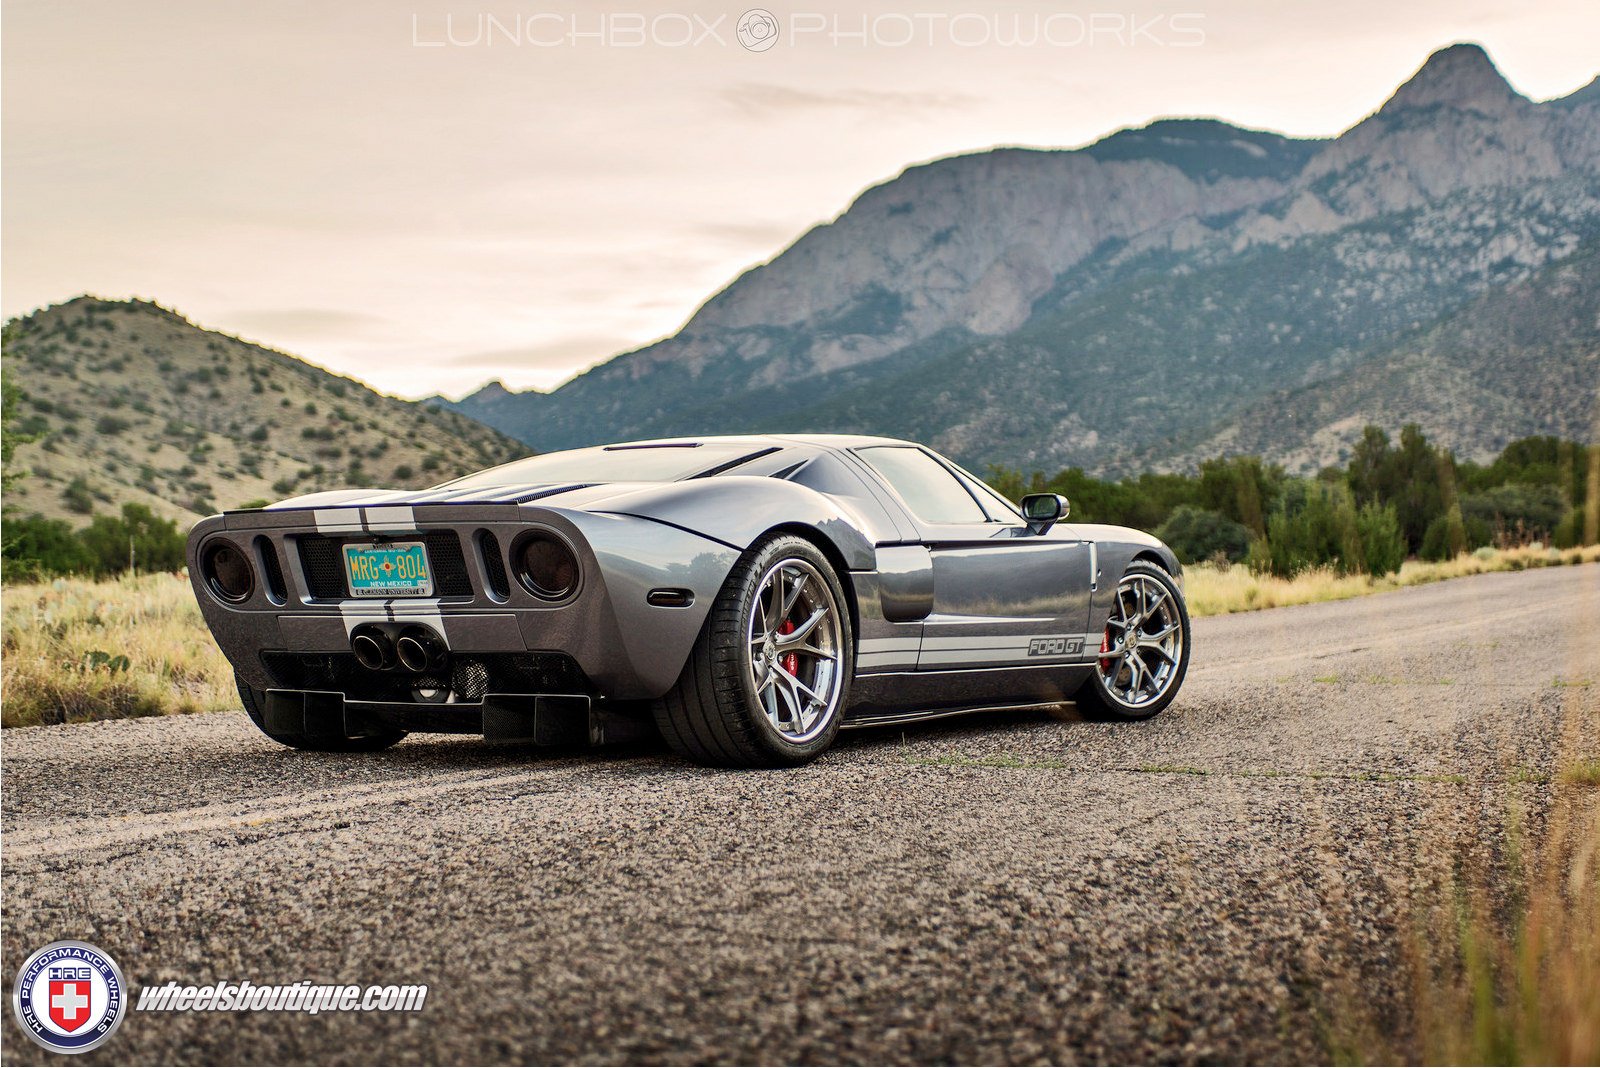 ford gt, Coupe, Cars, Supercars, Hre, Wheels Wallpaper